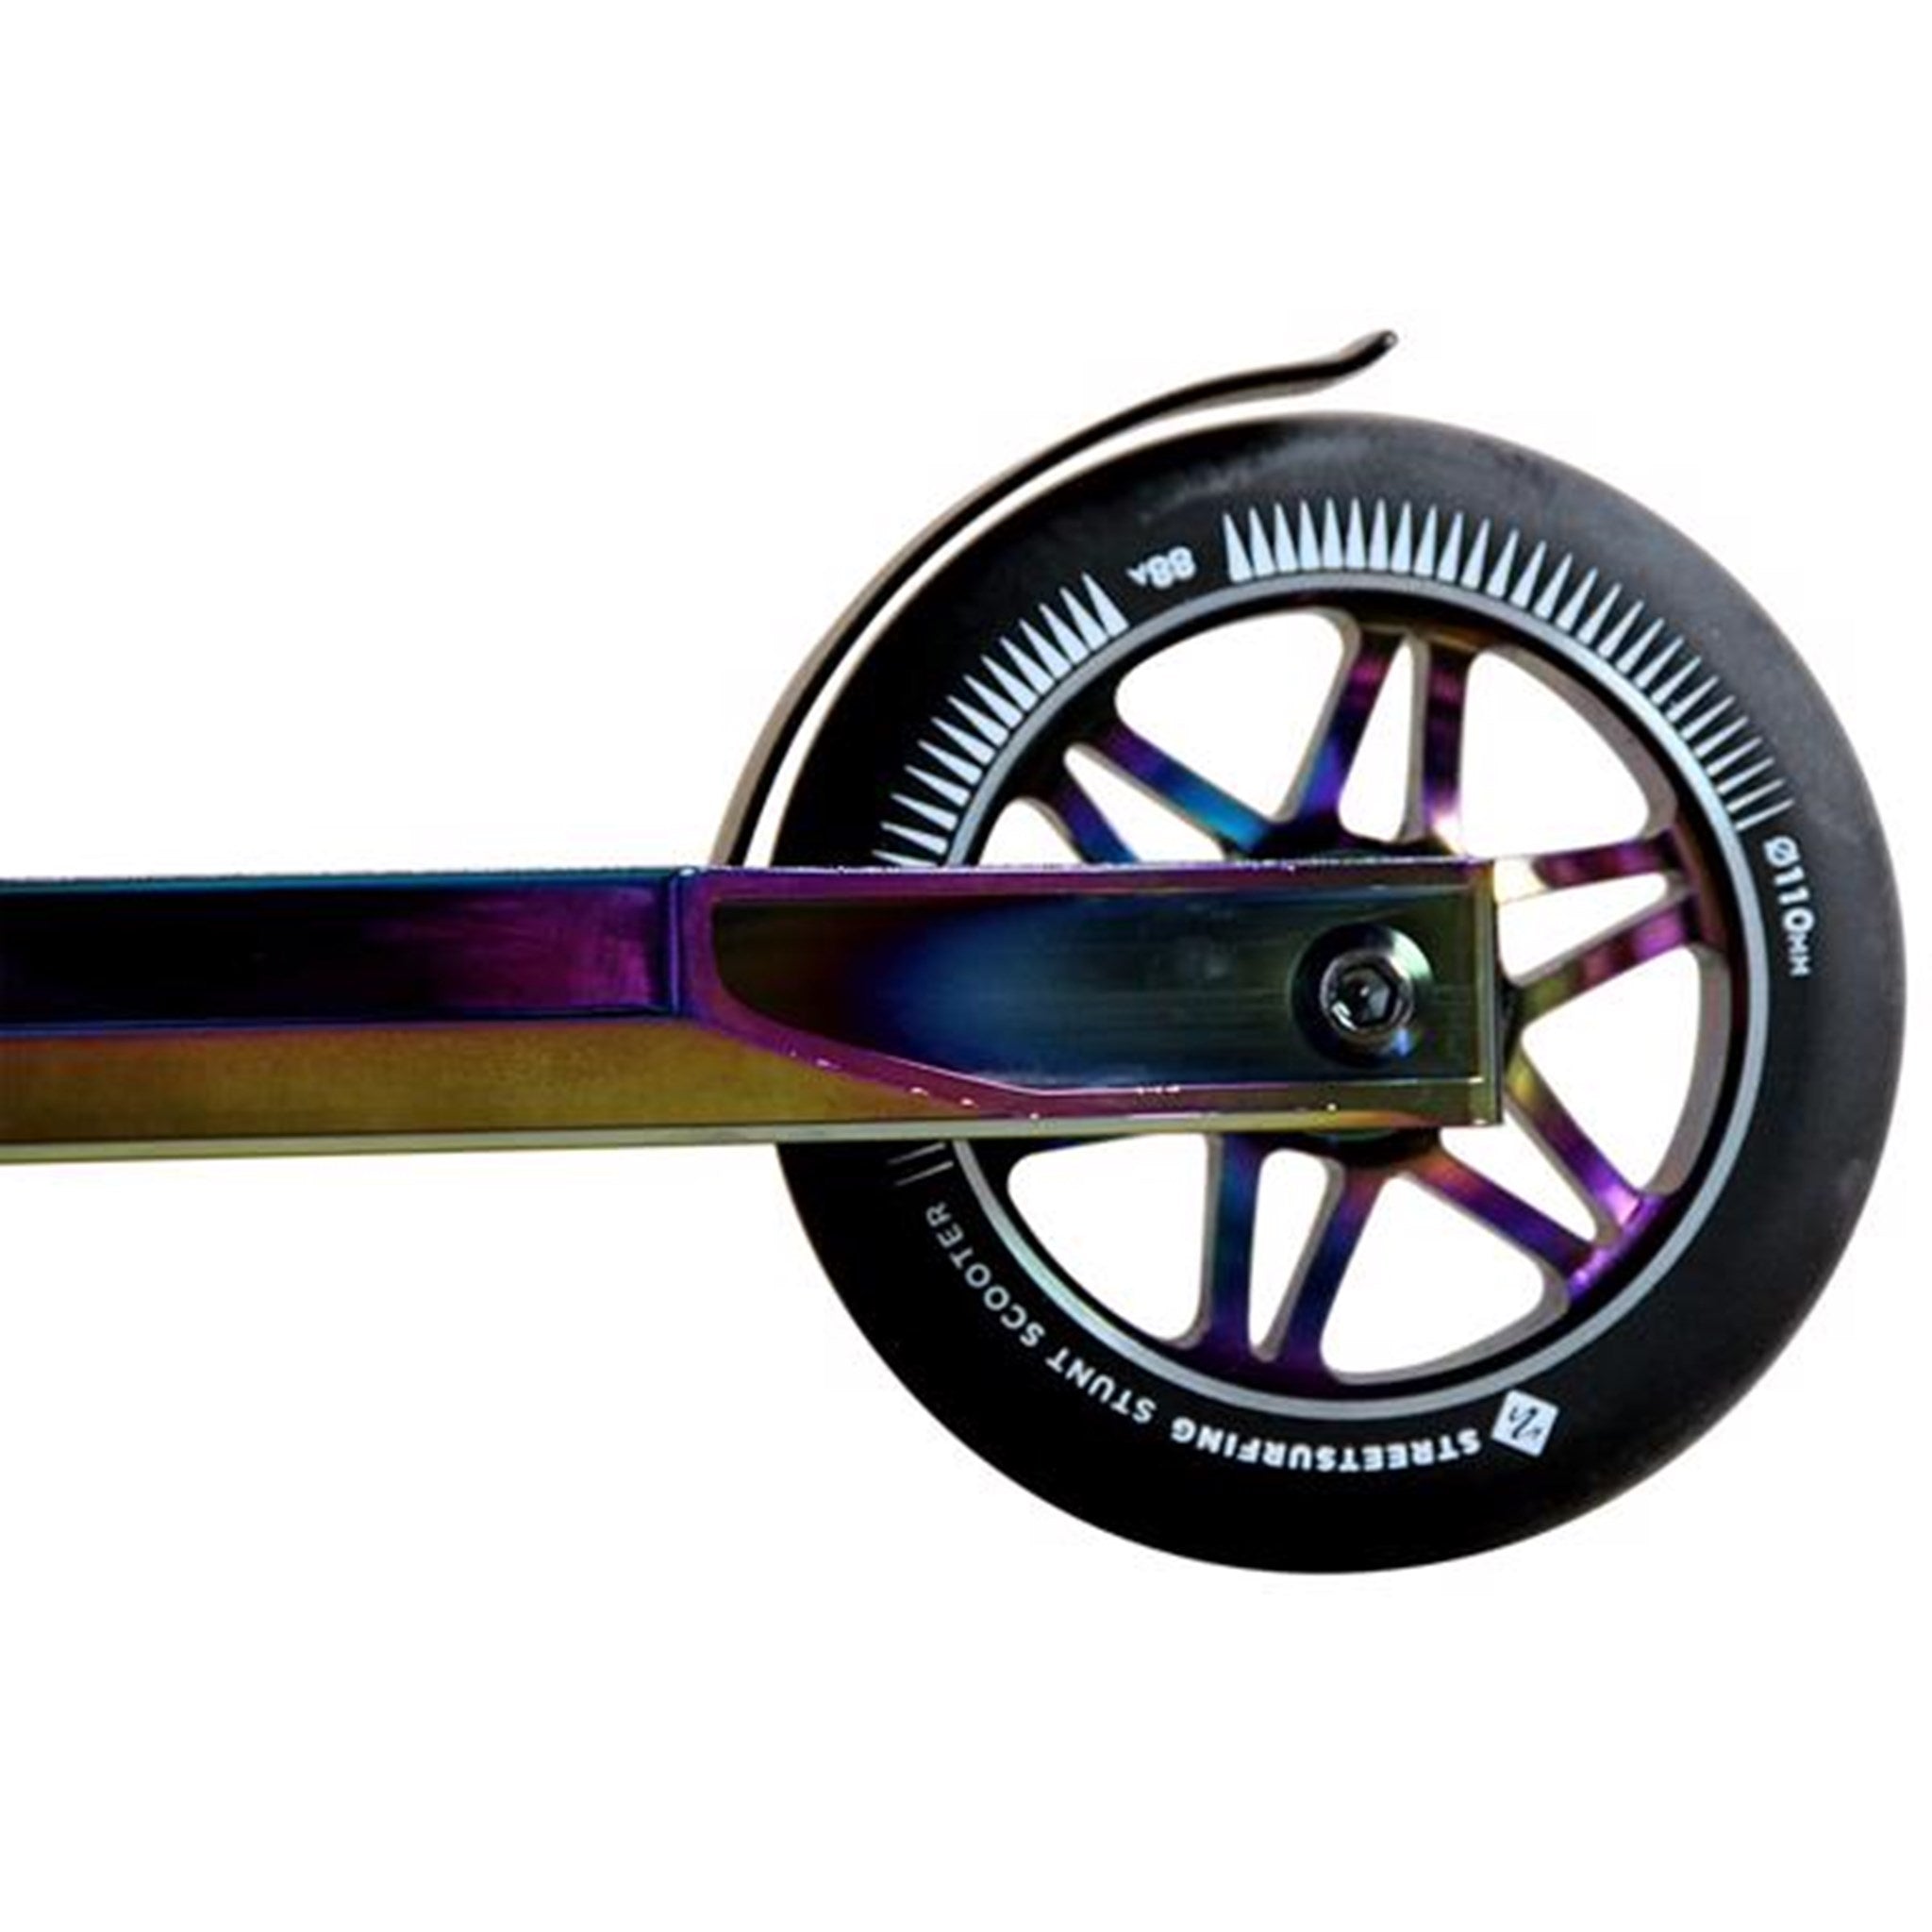 Street Surfing Scooter Ripper Neochrome 4